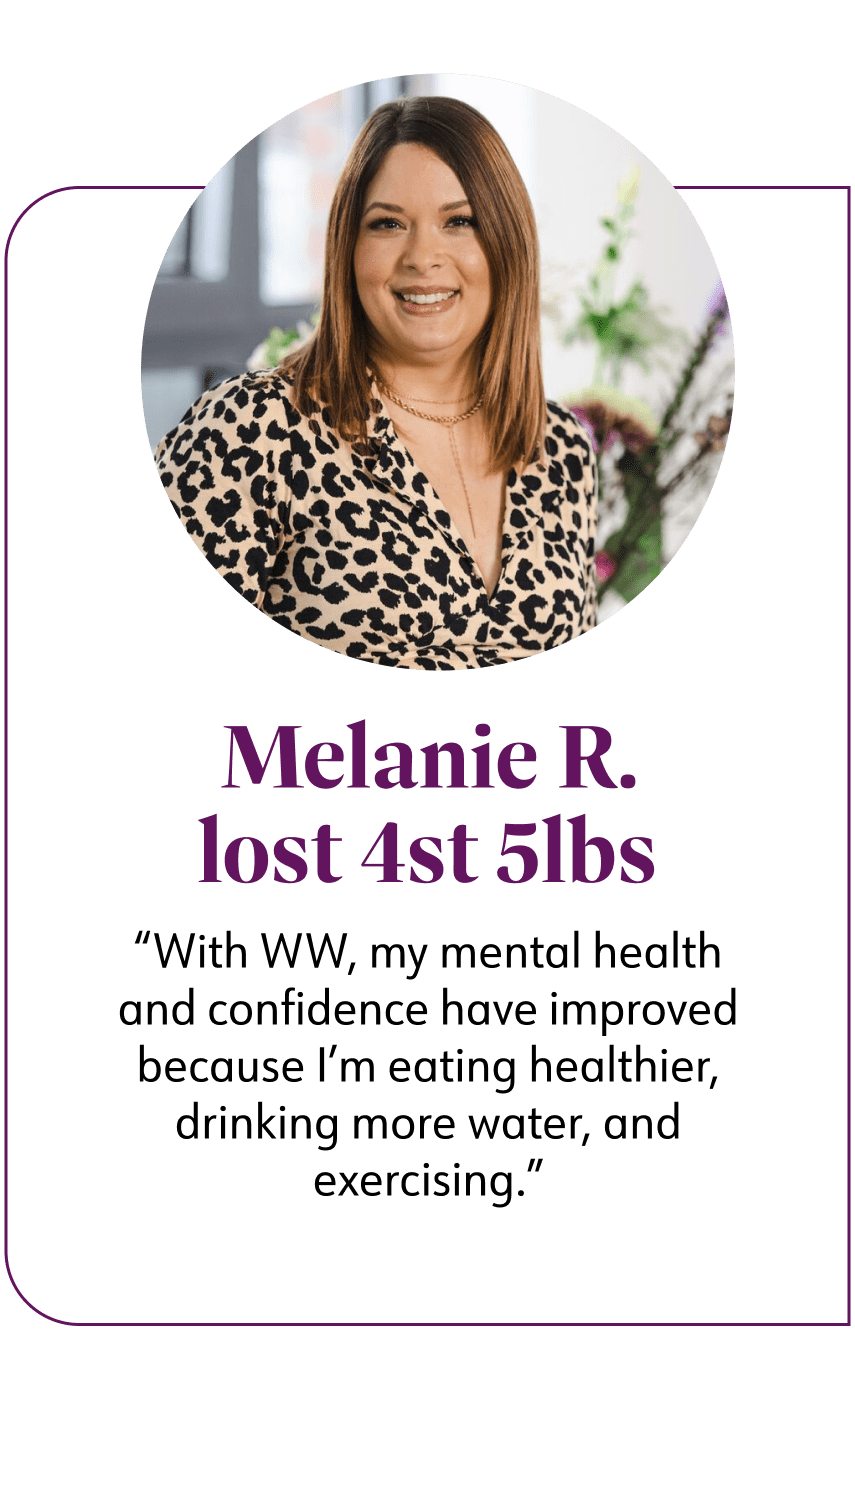 Melanie R, WW member lost 4st 5lbs^ with WW, my mental health and confidence have improved because i'm eating healthier, drinking more water, and exercising.